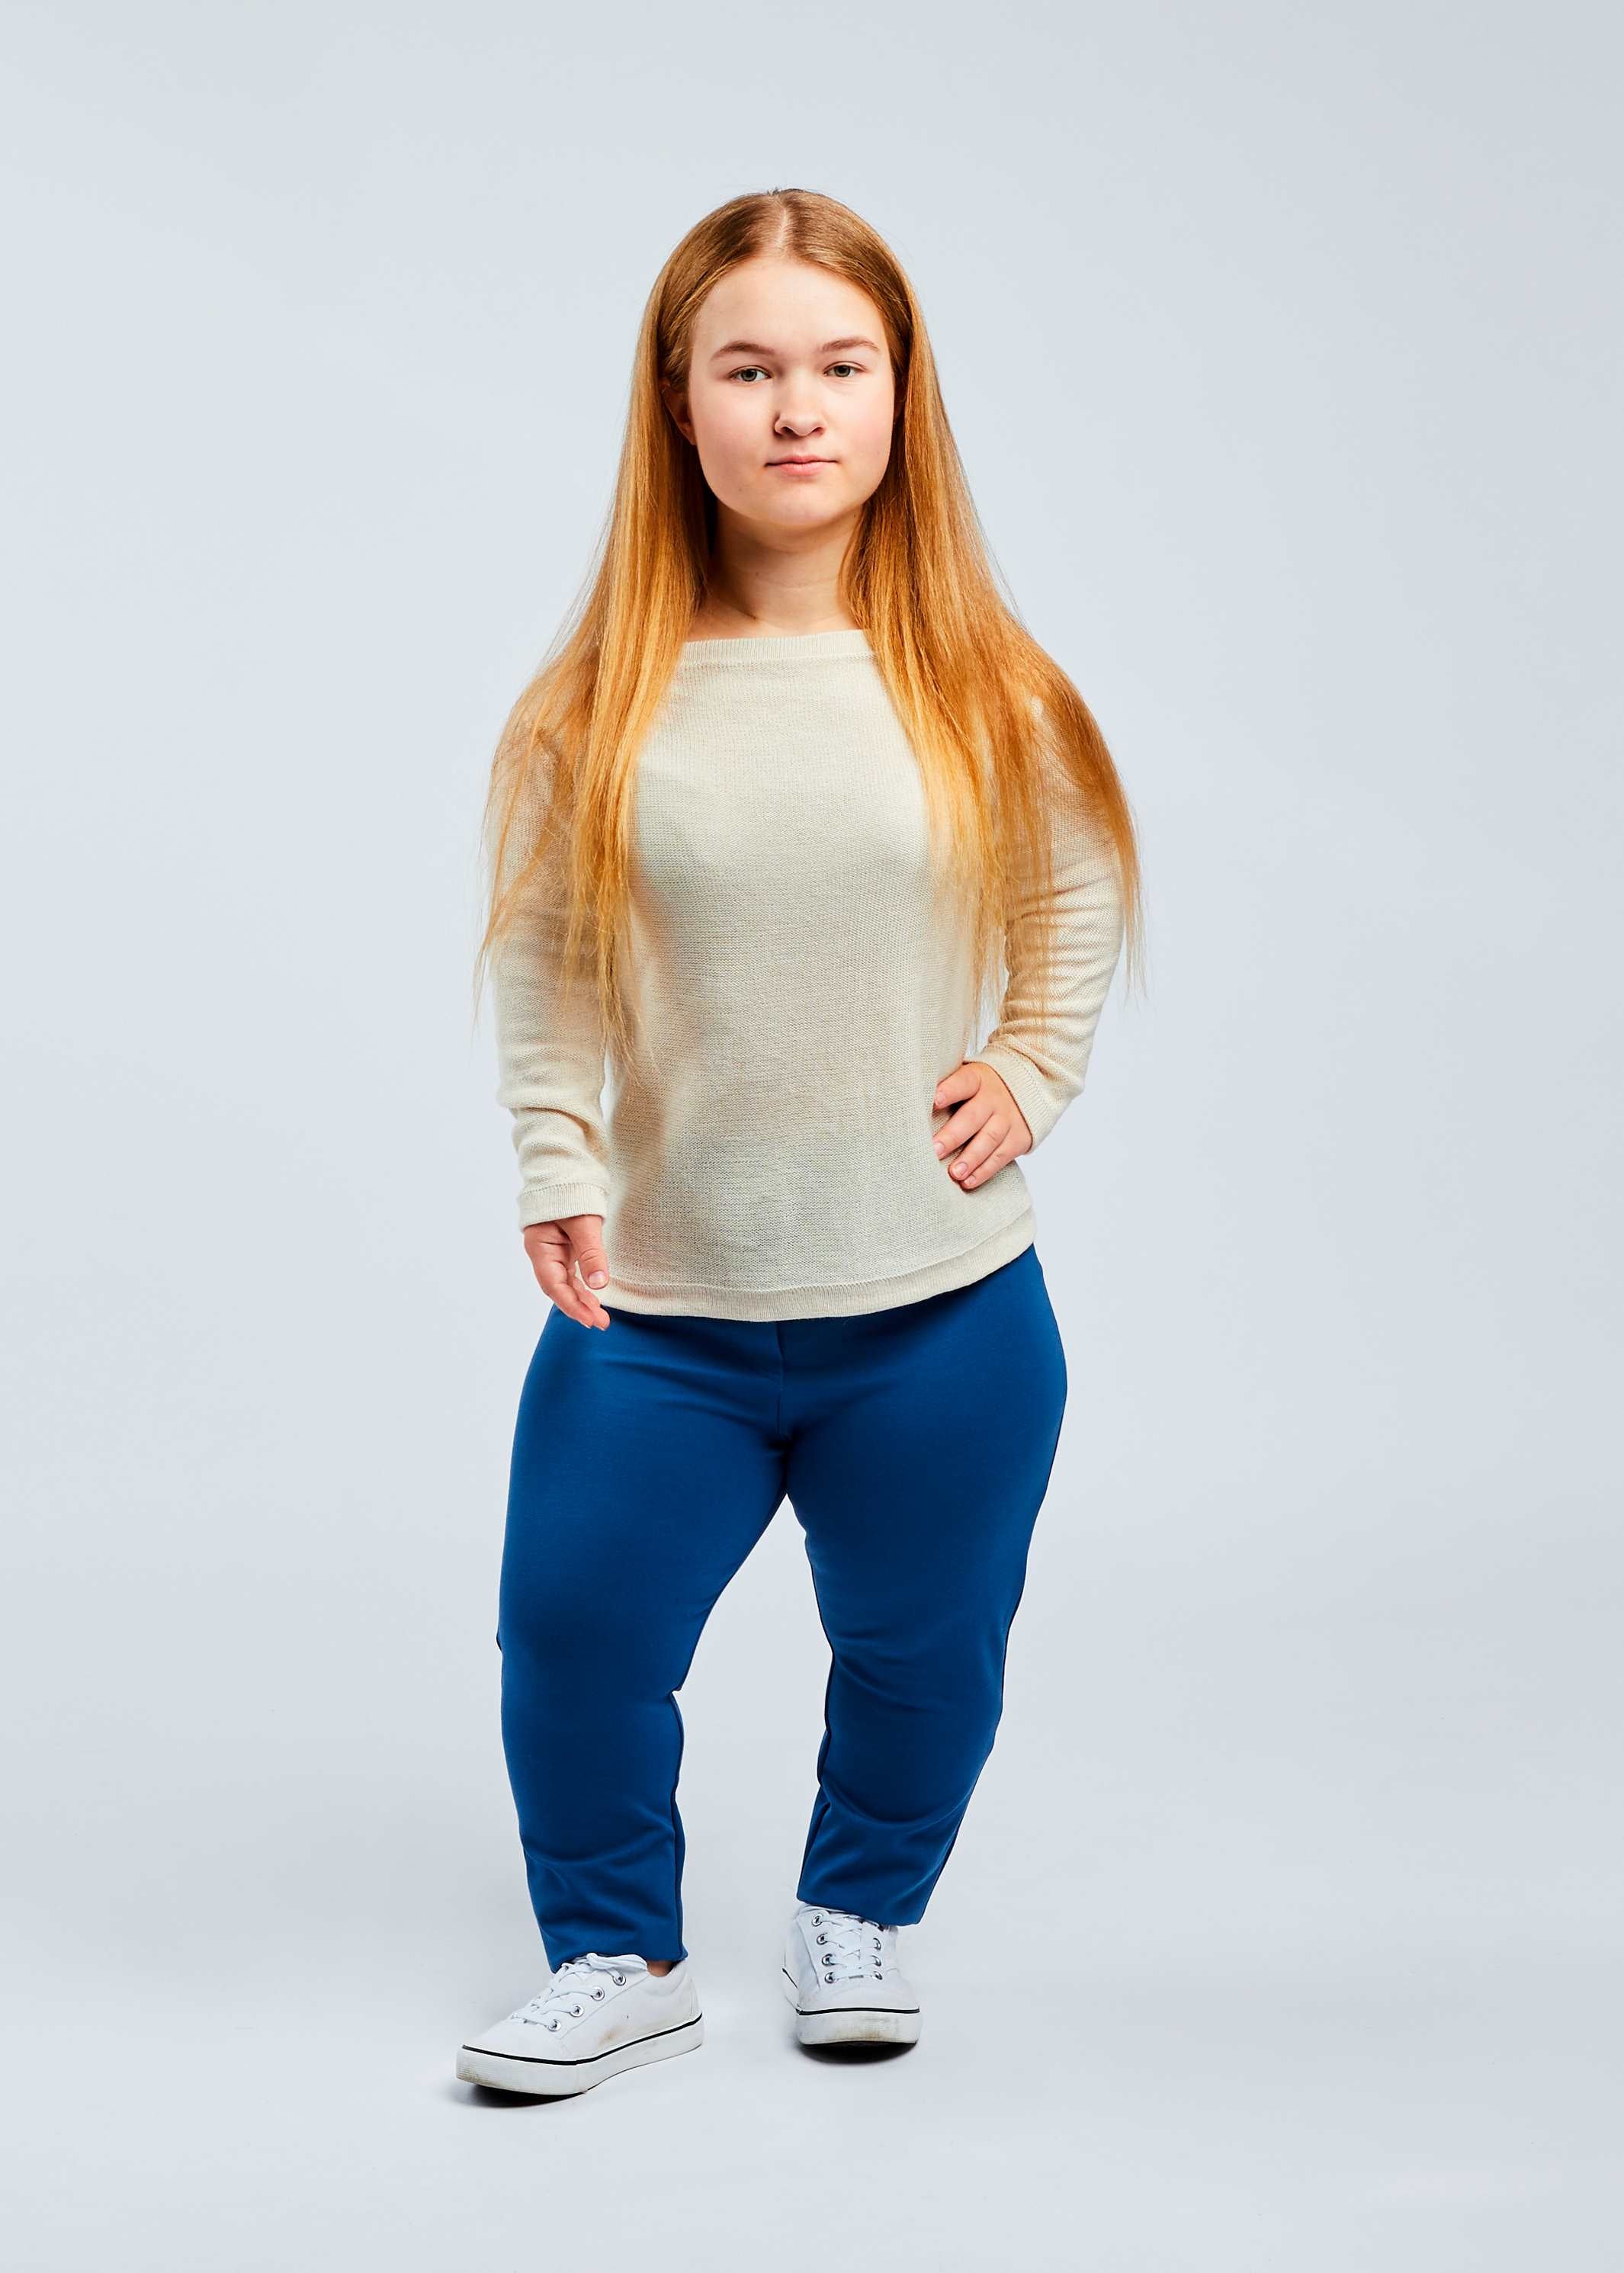 woman with dwarfism wearing blue pants and white pullover